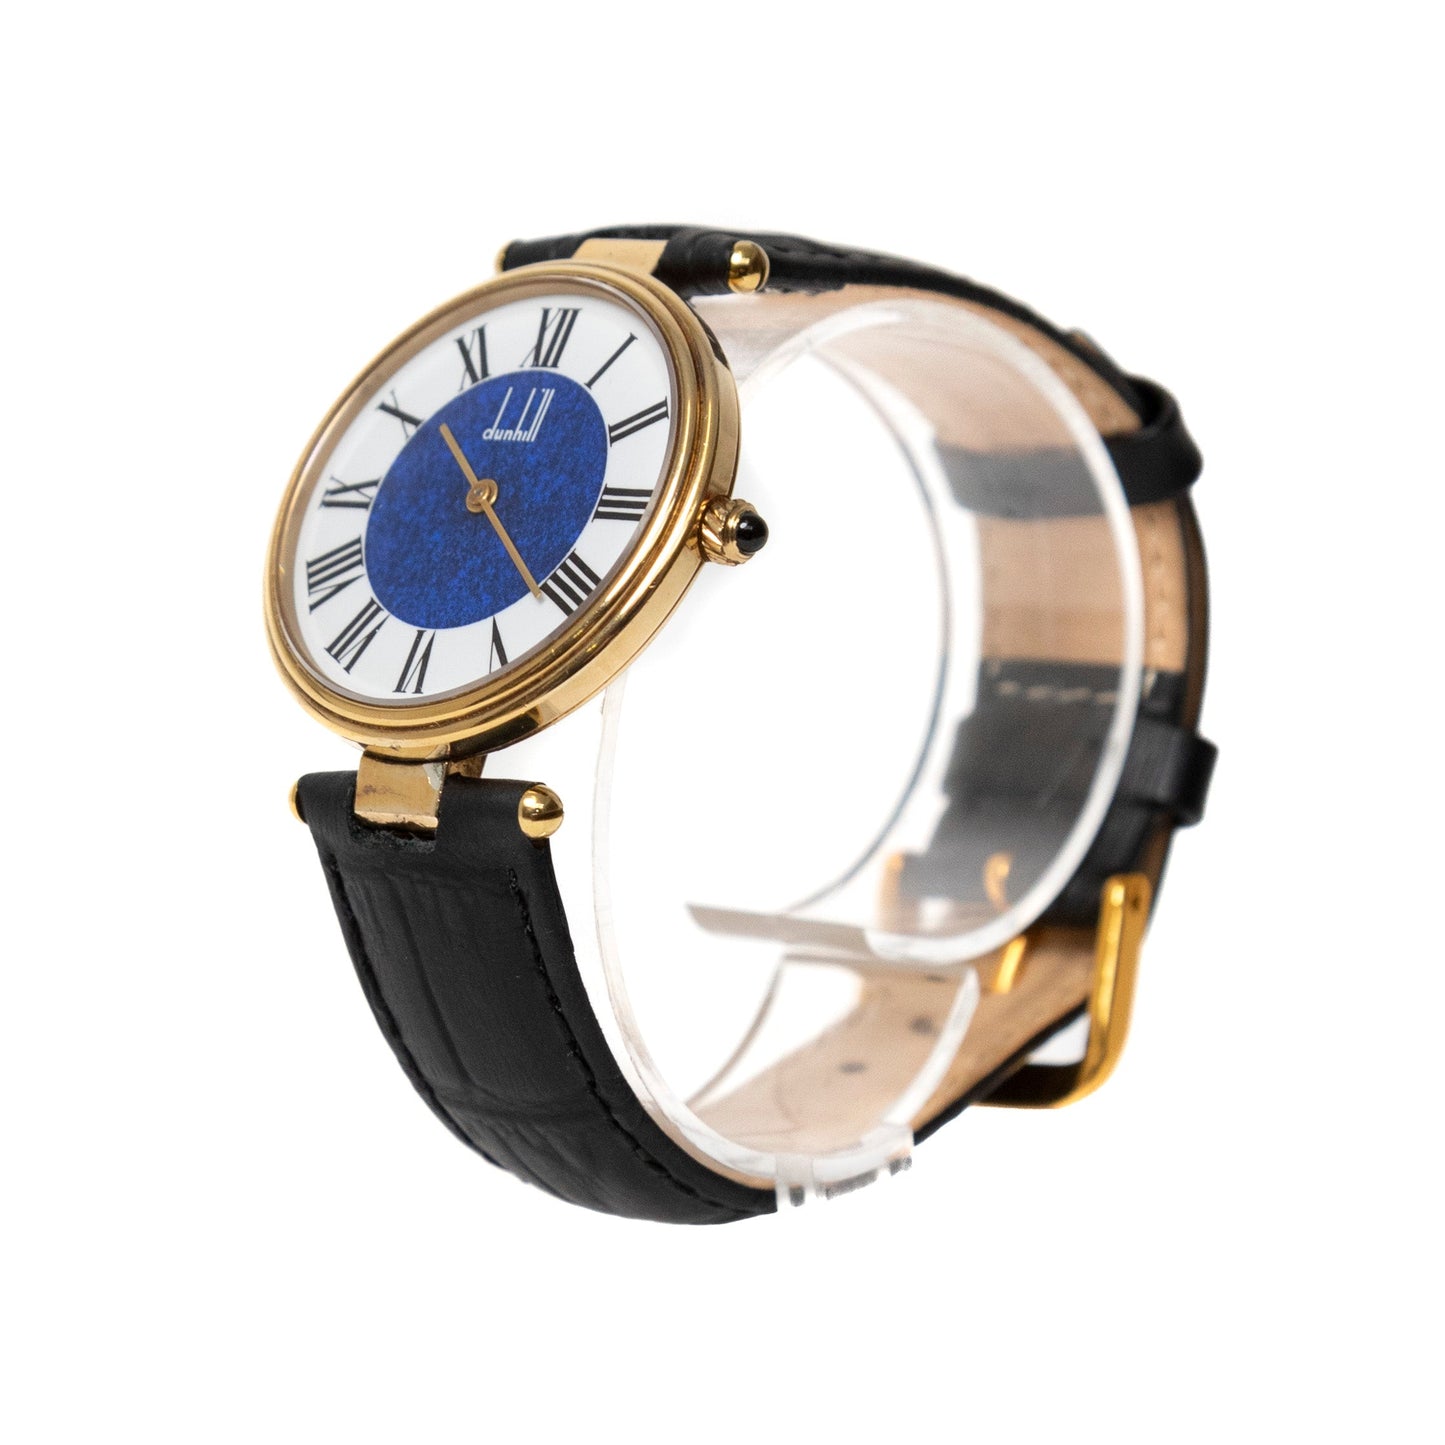 Dunhill Model 267 Watch